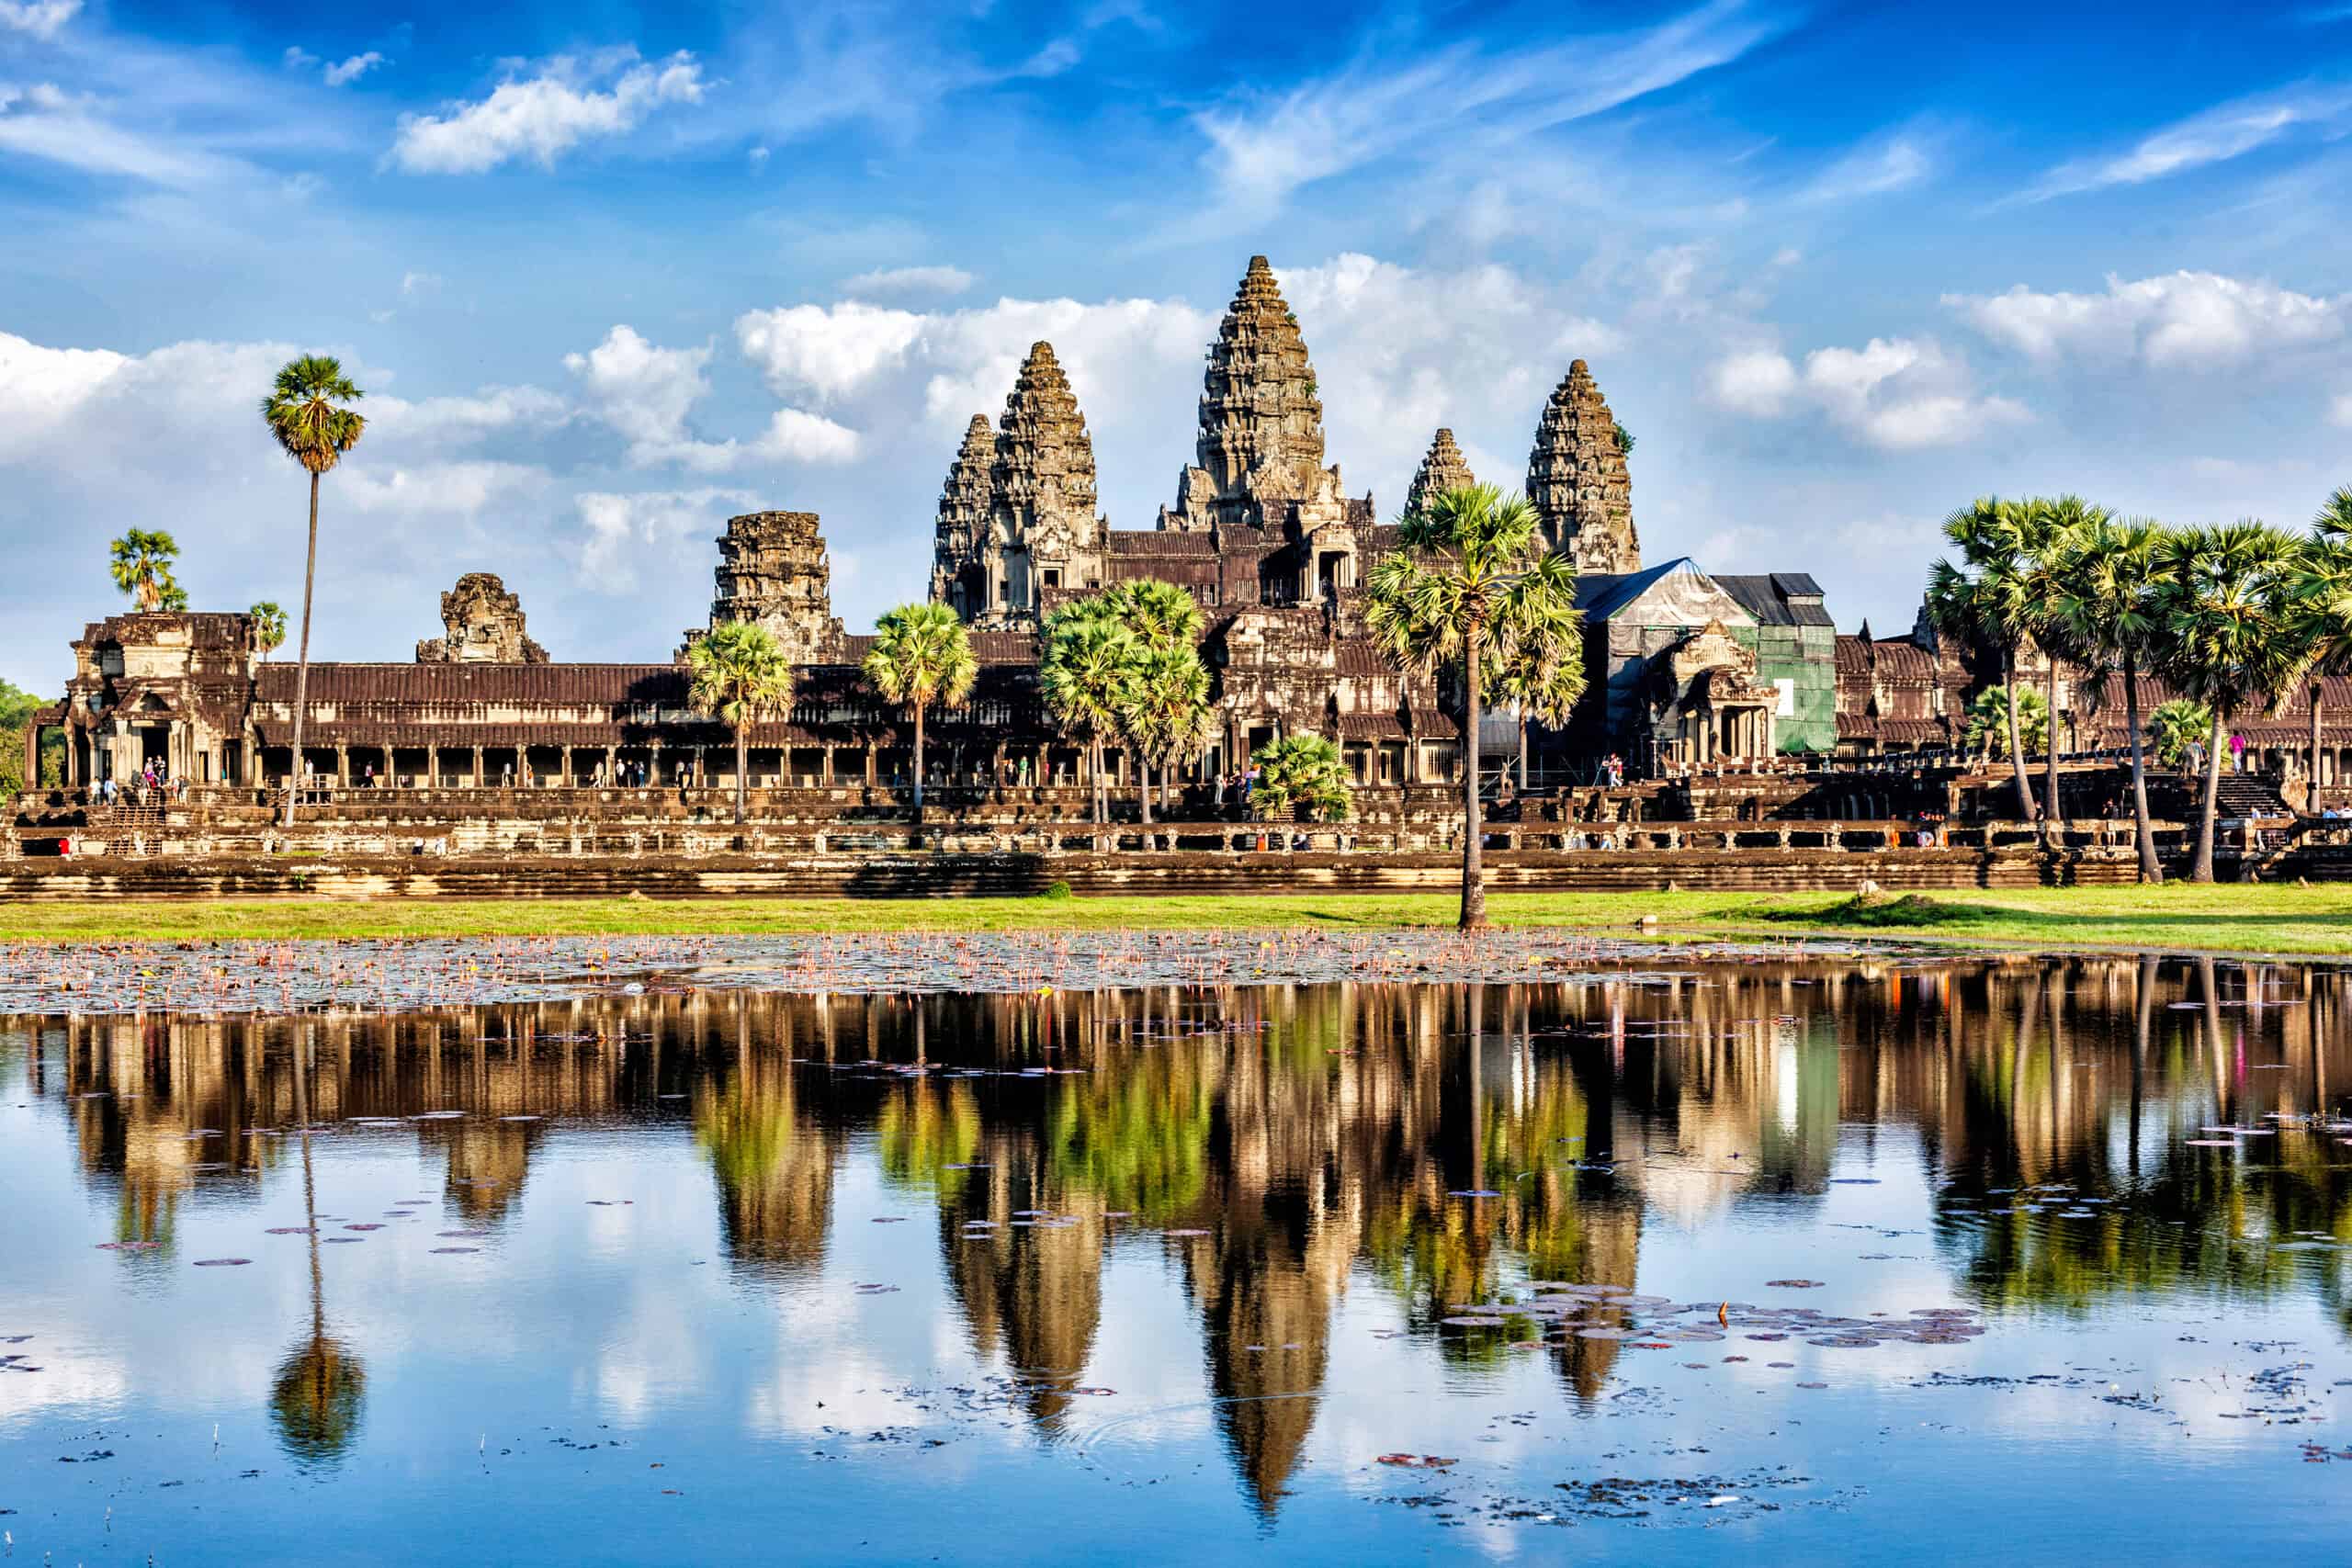 <p>Siem Reap, the gateway to the awe-inspiring Angkor Wat temple complex, offers solo travelers a blend of ancient history and exciting culture. At the Angkor Archaeological Park, you can explore the majestic Angkor Wat, the enigmatic Bayon Temple, and the tree-entwined Ta Prohm. </p> <p>Beyond the temples, Siem Reap’s bustling Old Market and lively Pub Street provide ample opportunities for shopping, dining, and nightlife. With its engrossing cultural scene, including traditional Apsara dance performances, and a variety of wellness centers, Siem Reap ensures a memorable and enthralling solo travel experience.</p>